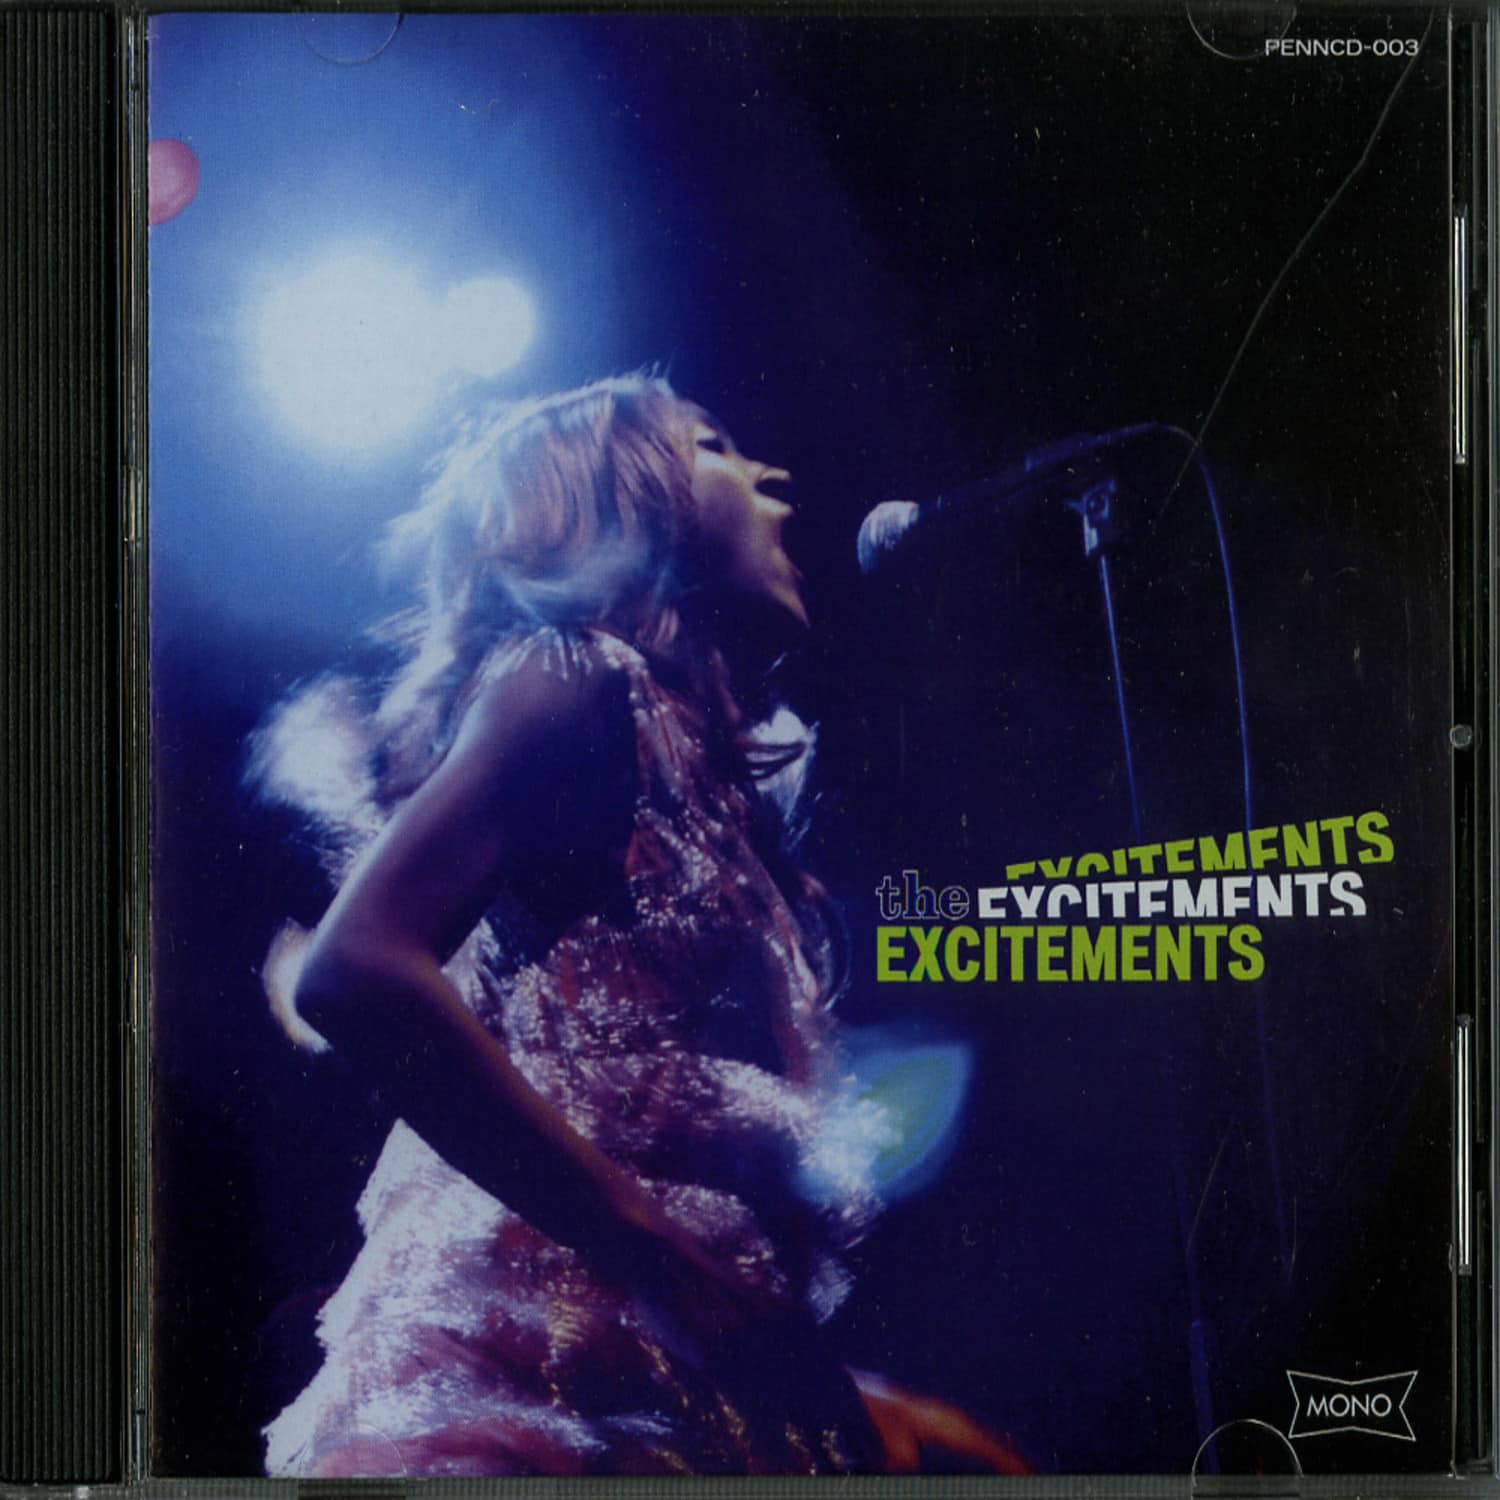 The Excitements - THE EXCITEMENTS 